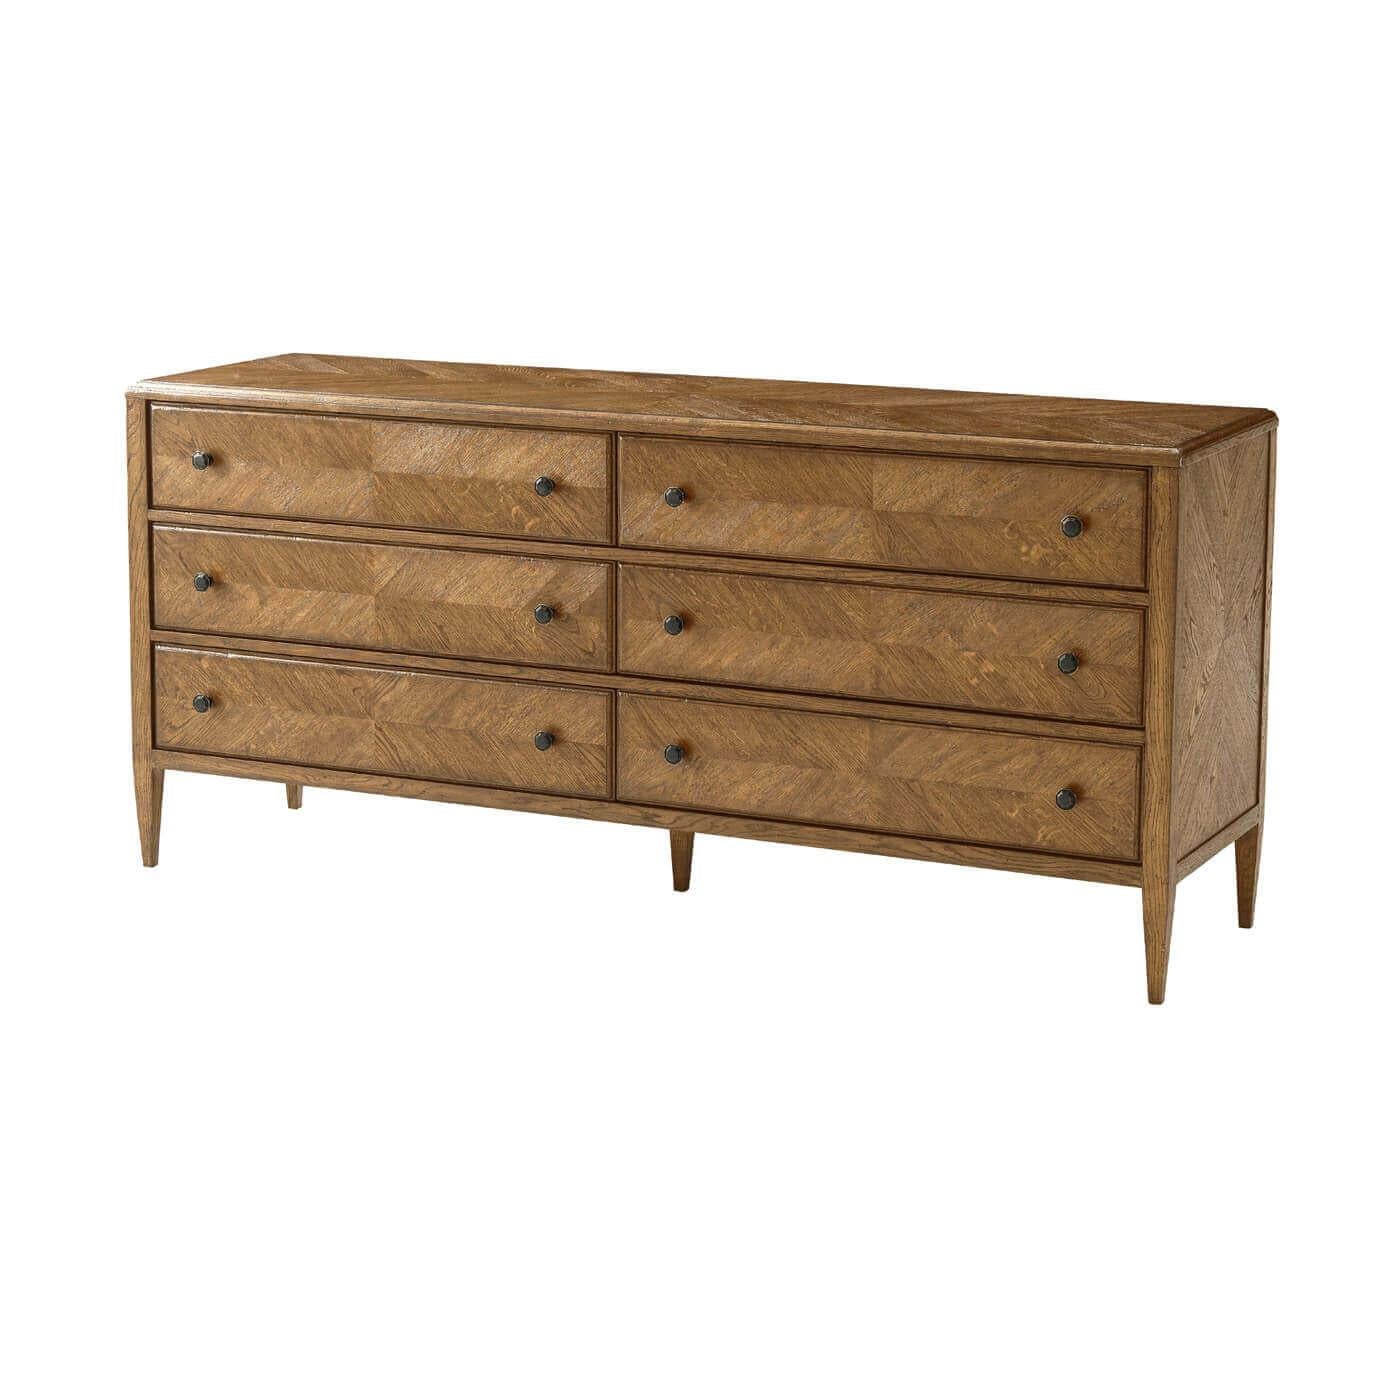 A light oak parquetry six-drawer dresser in dawn finish. This beautiful hand-carved oak dresser includes six drawers with mirrored herringbone starburst parquetry finished with Verde Bronze handles on classically tapered oak legs. A perfect dresser